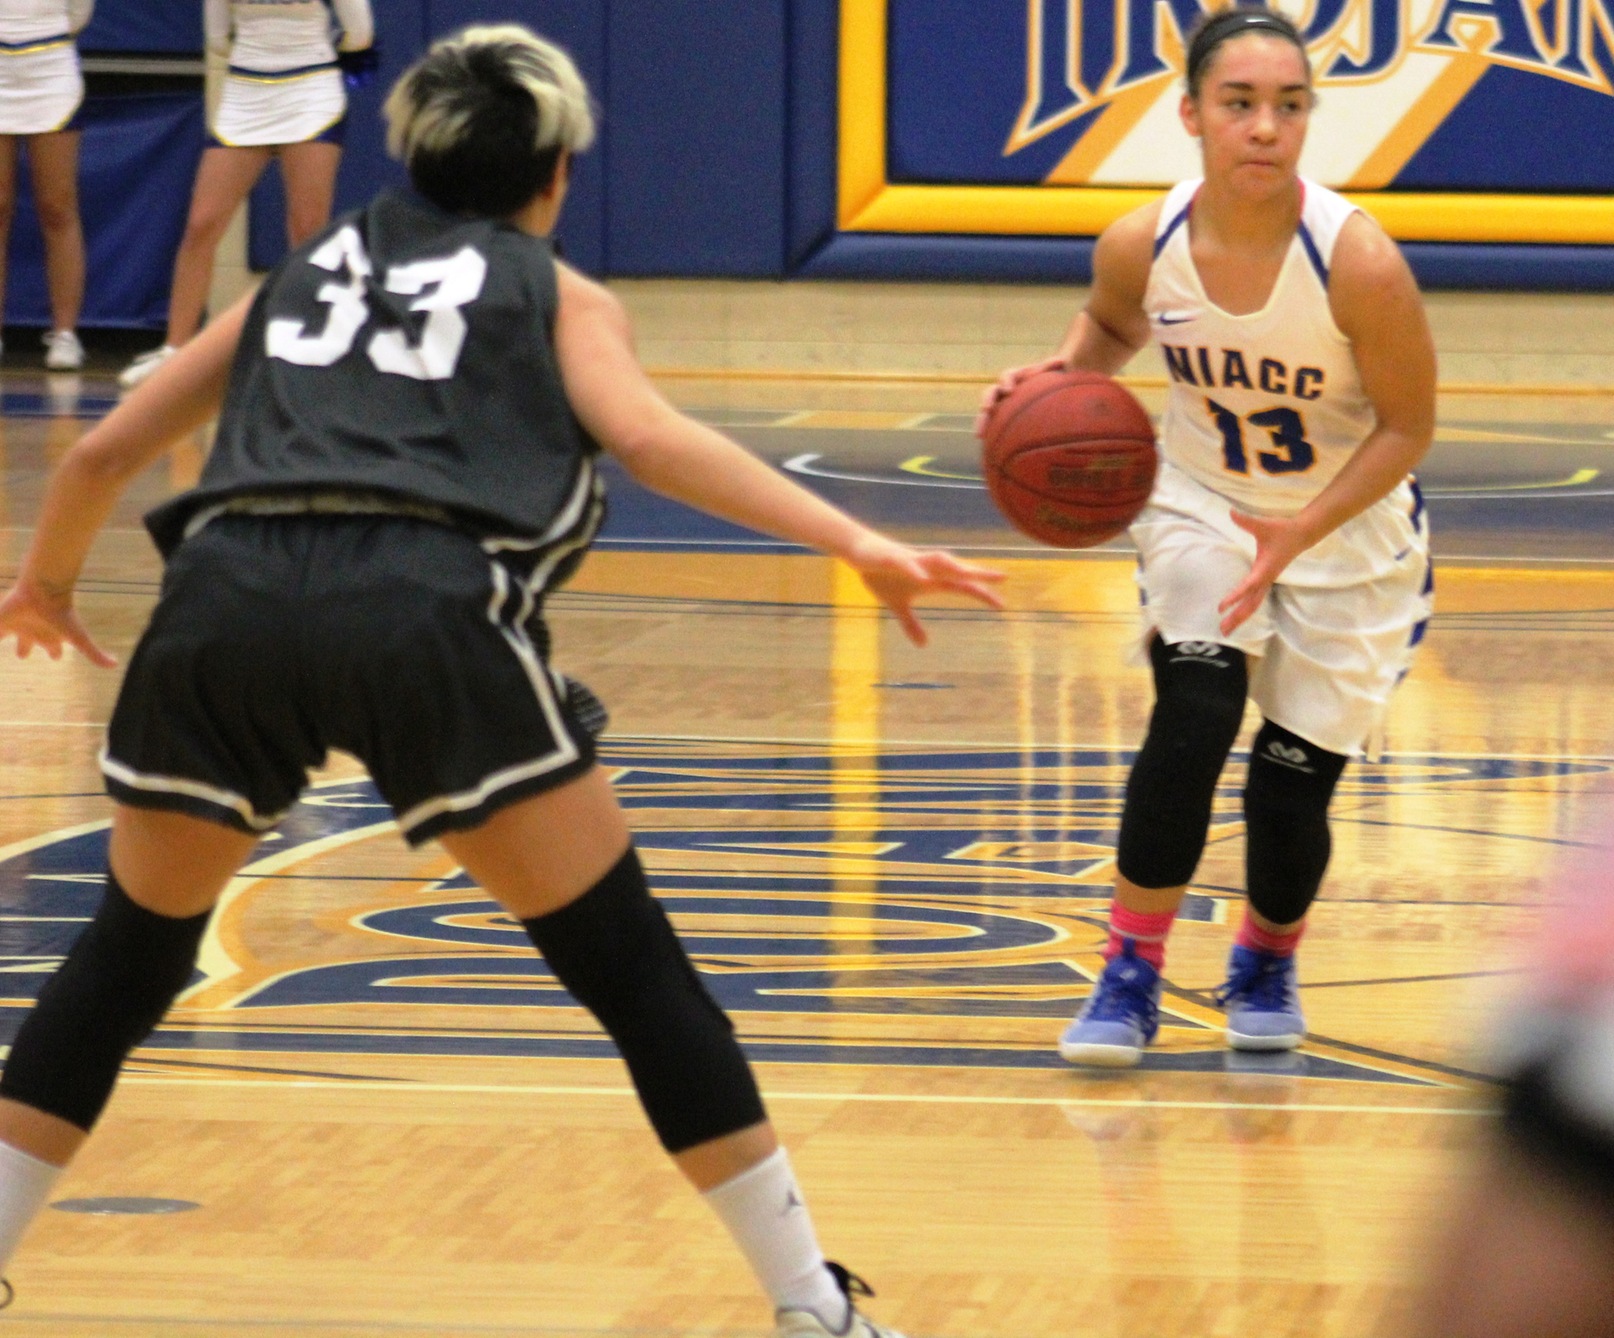 NIACC's Adria Stewart brings the ball up the court during a nonconference game against Marshalltown CC earlier this season.